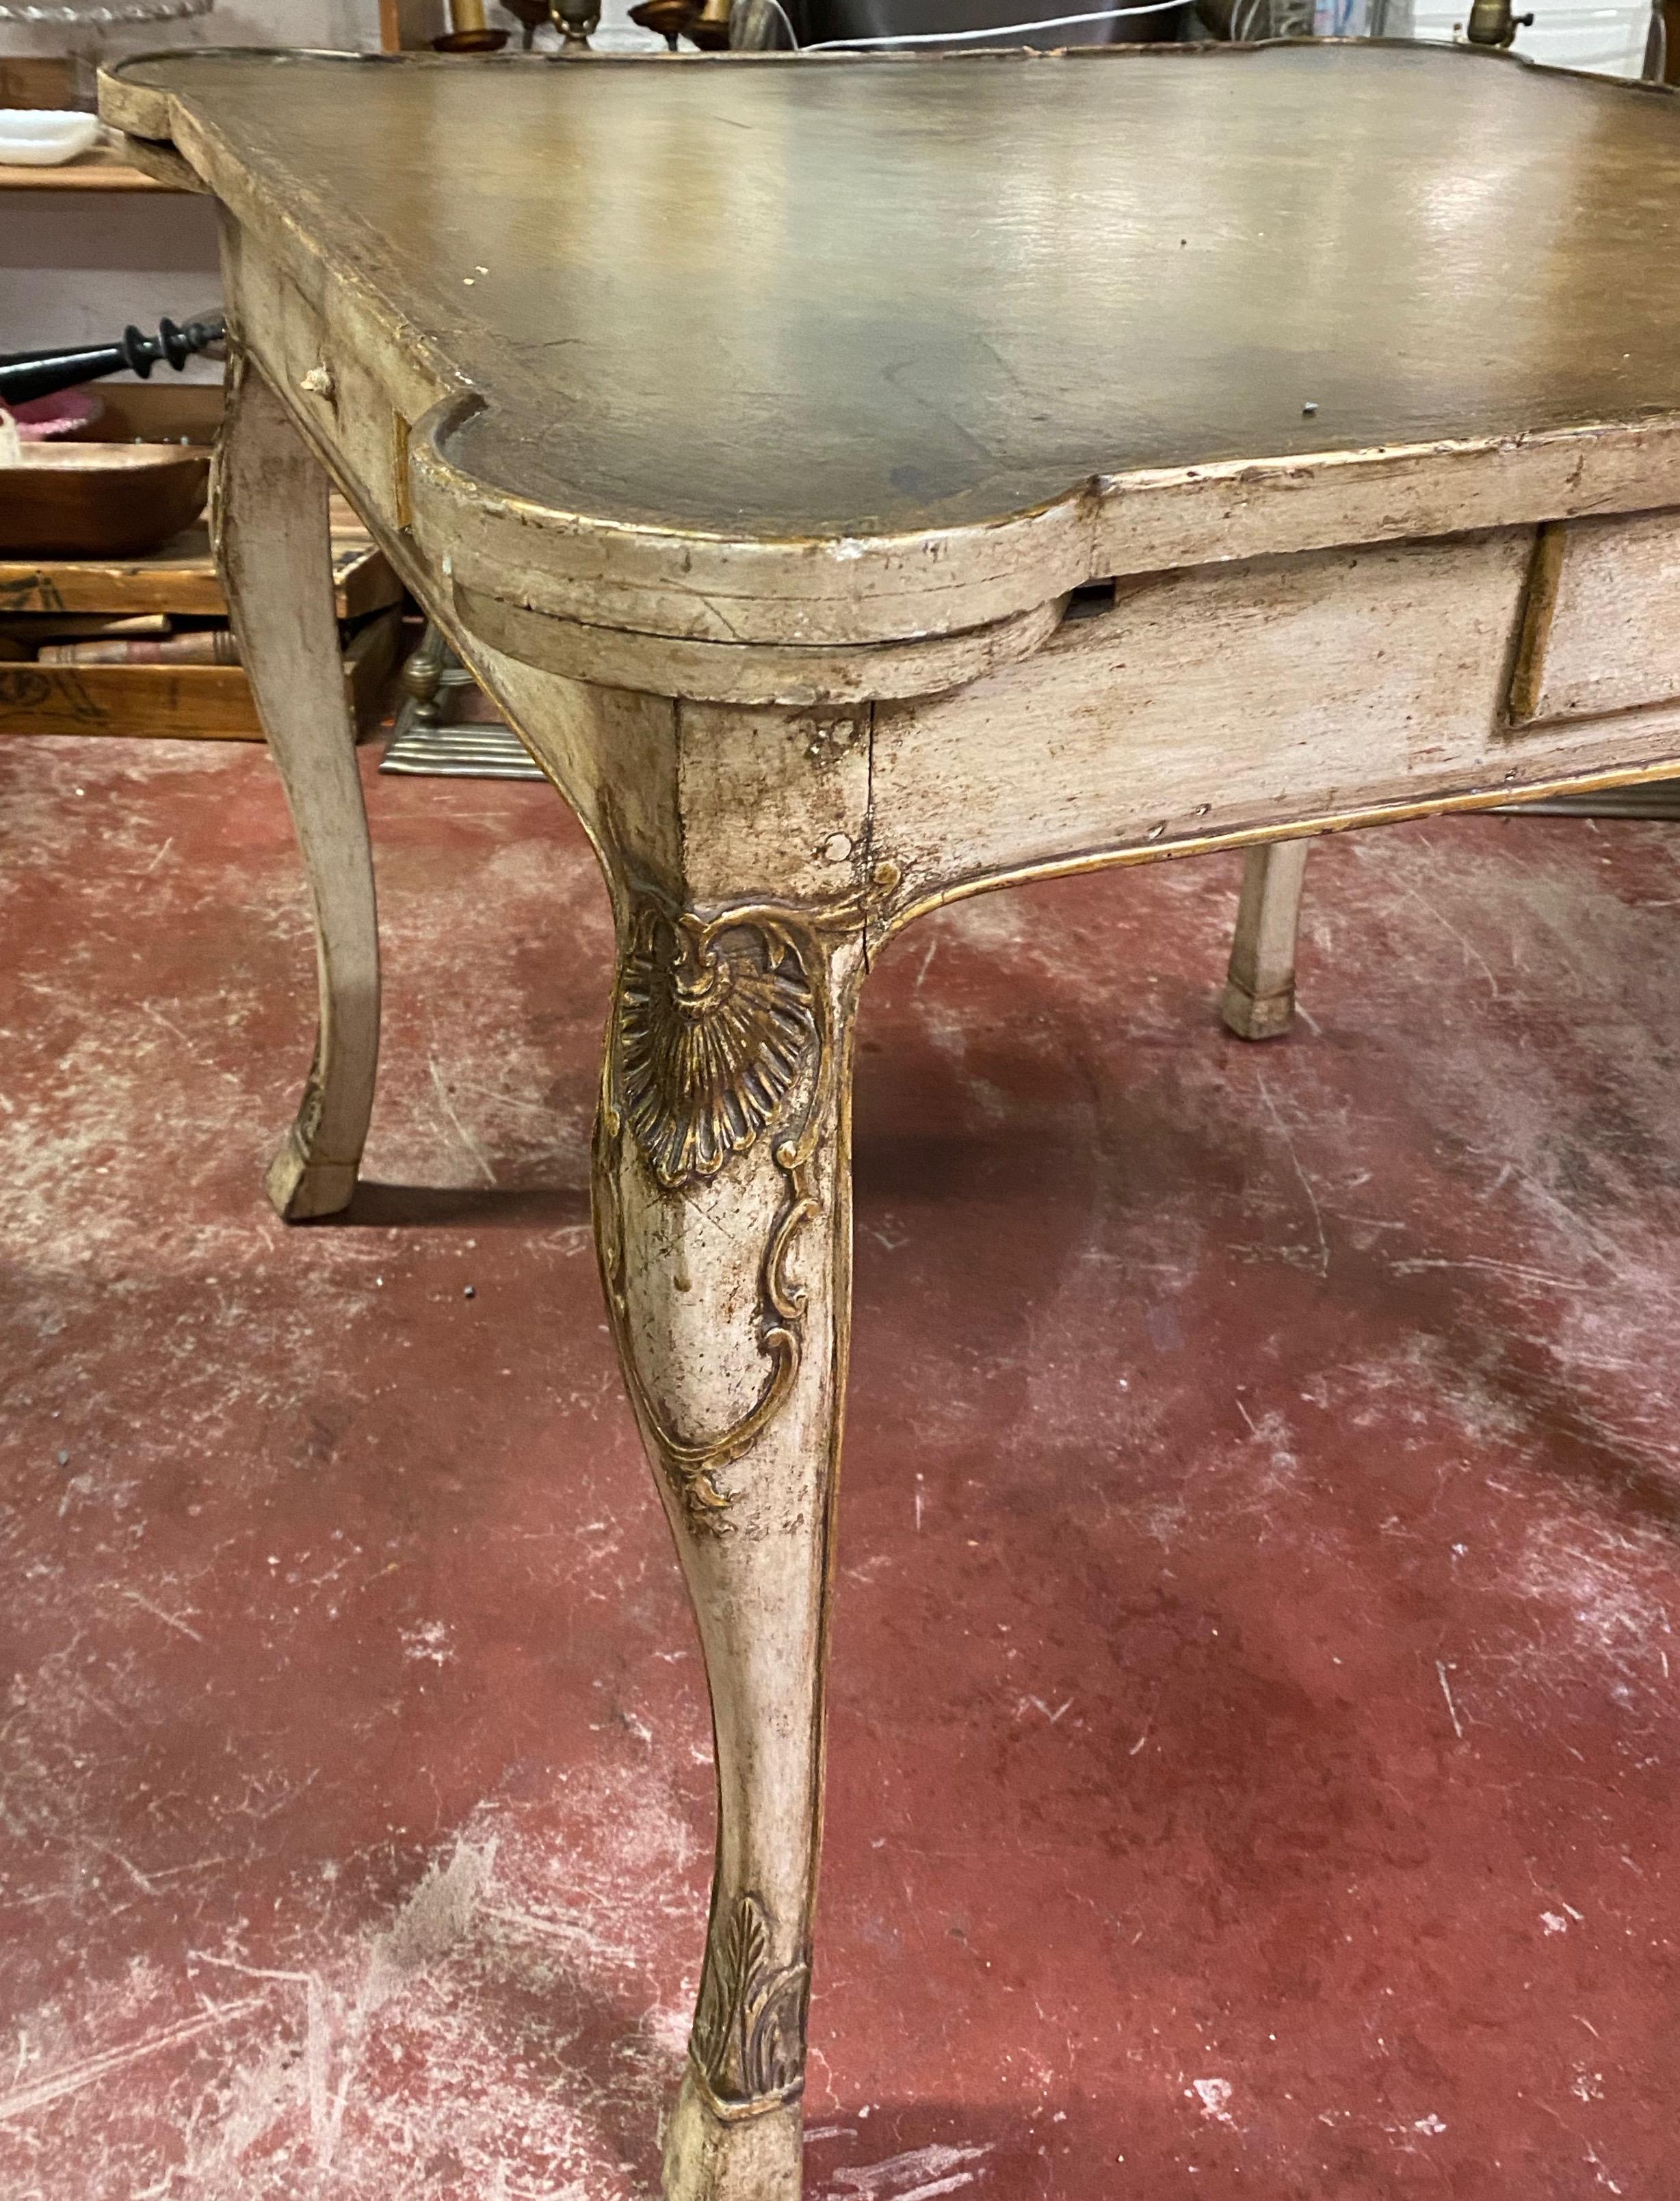 Early 20th century carved French games table with leather top, circa 1920

Beautiful games table with a leather top, four corner folding cup holders and a single drawer on each side.

Dimensions 32